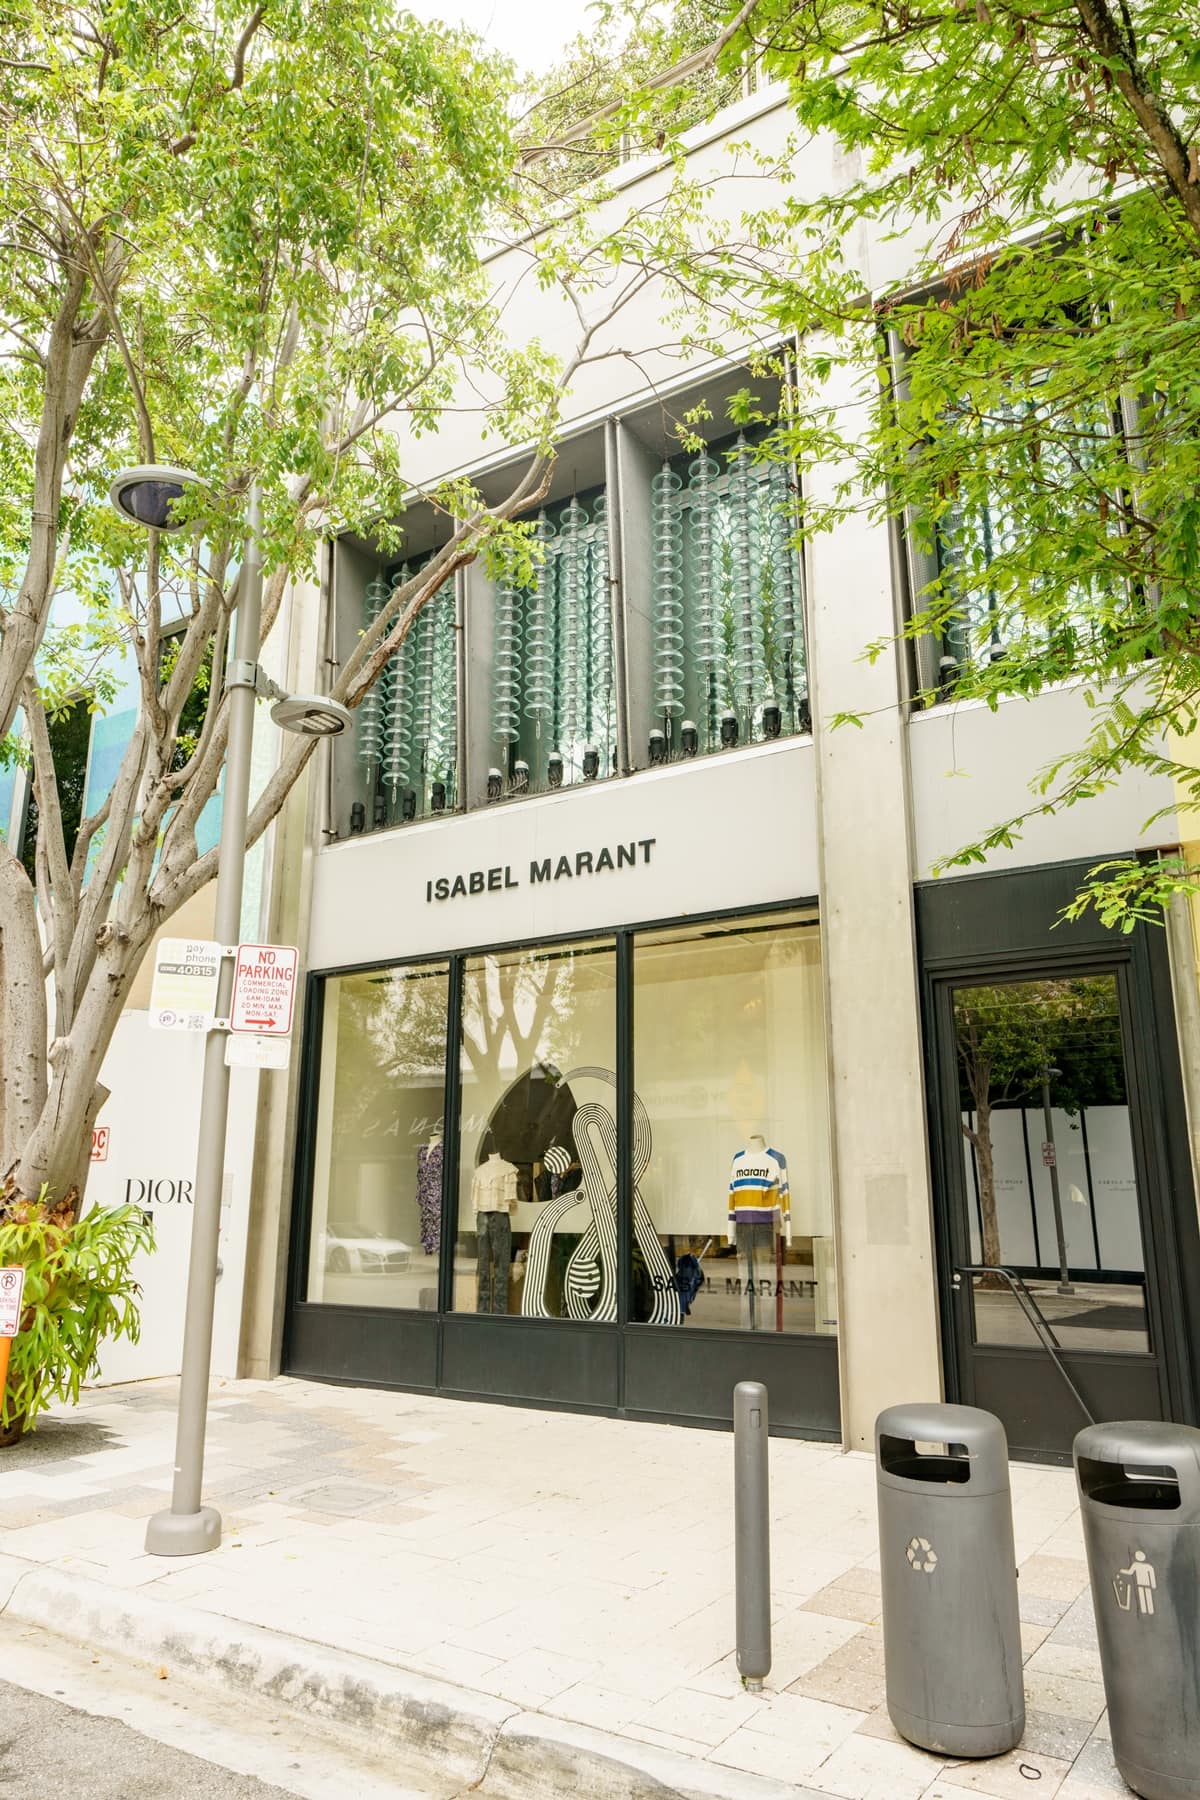 Isabel Marant has stores all over the world, including a boutique in the Miami Design District, a neighborhood in Miami, Florida